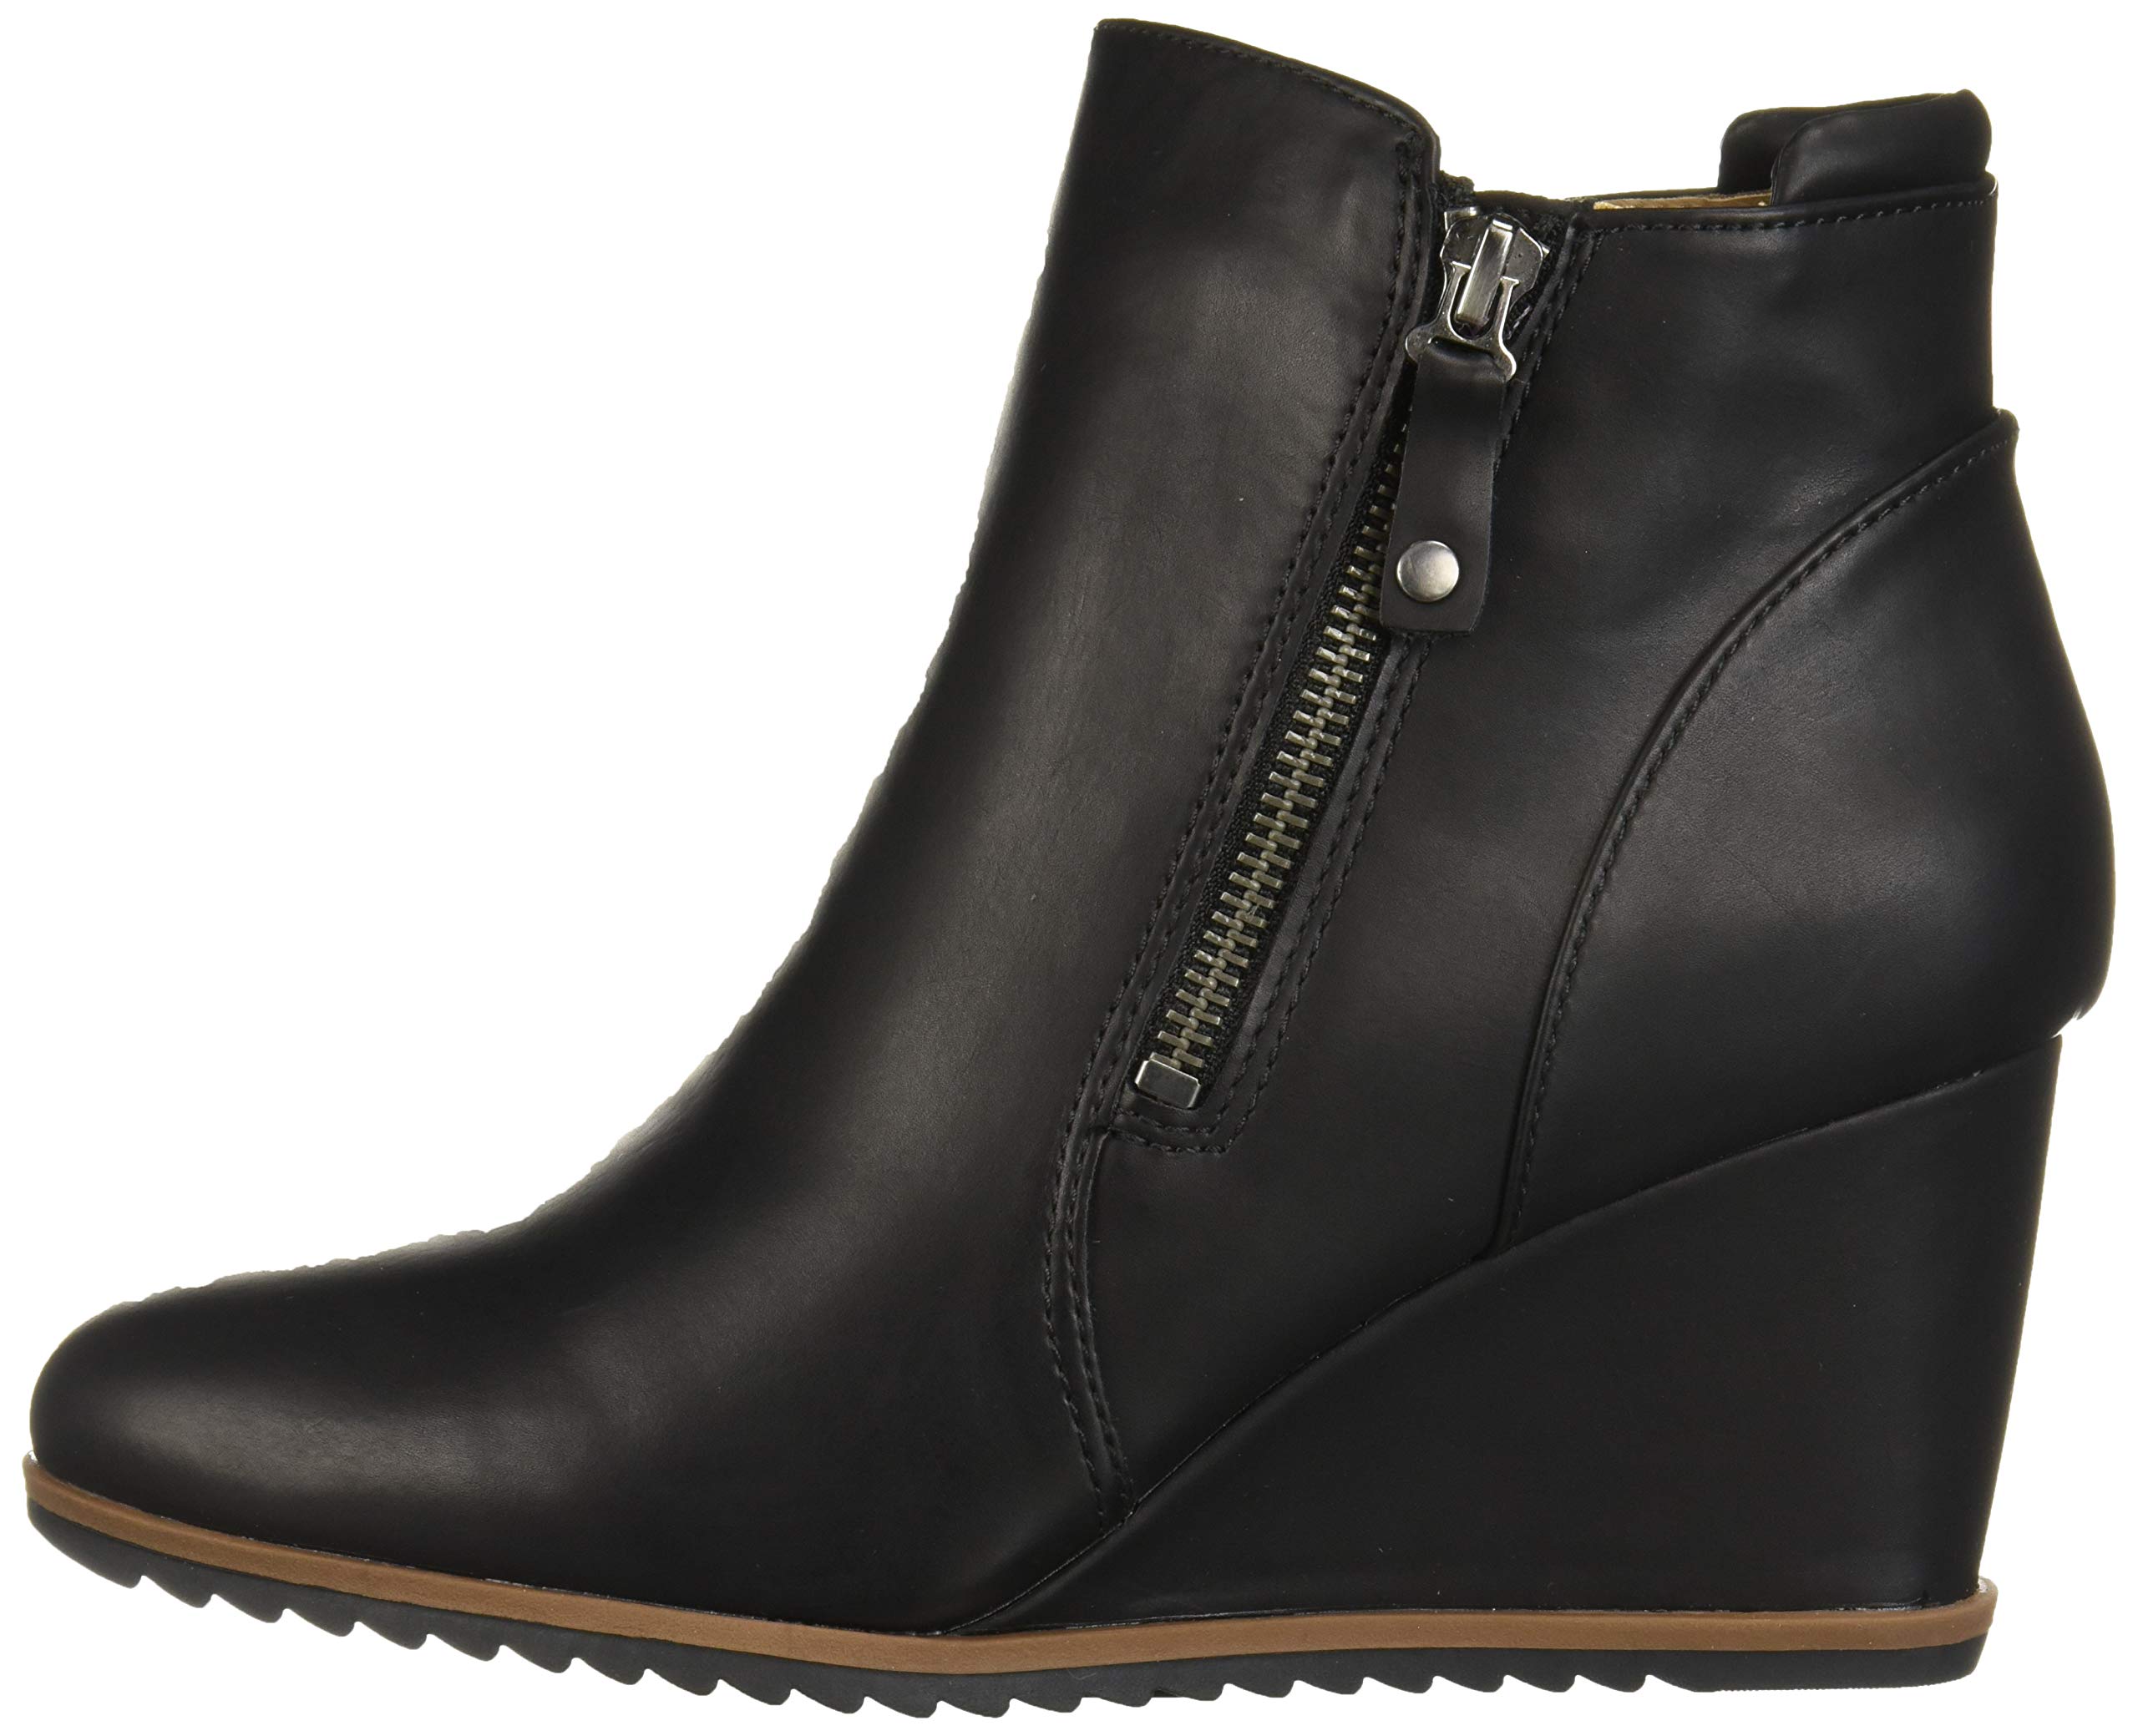 SOUL Naturalizer Women's Haley Black Ankle Boot / Wedge Bootie | eBay